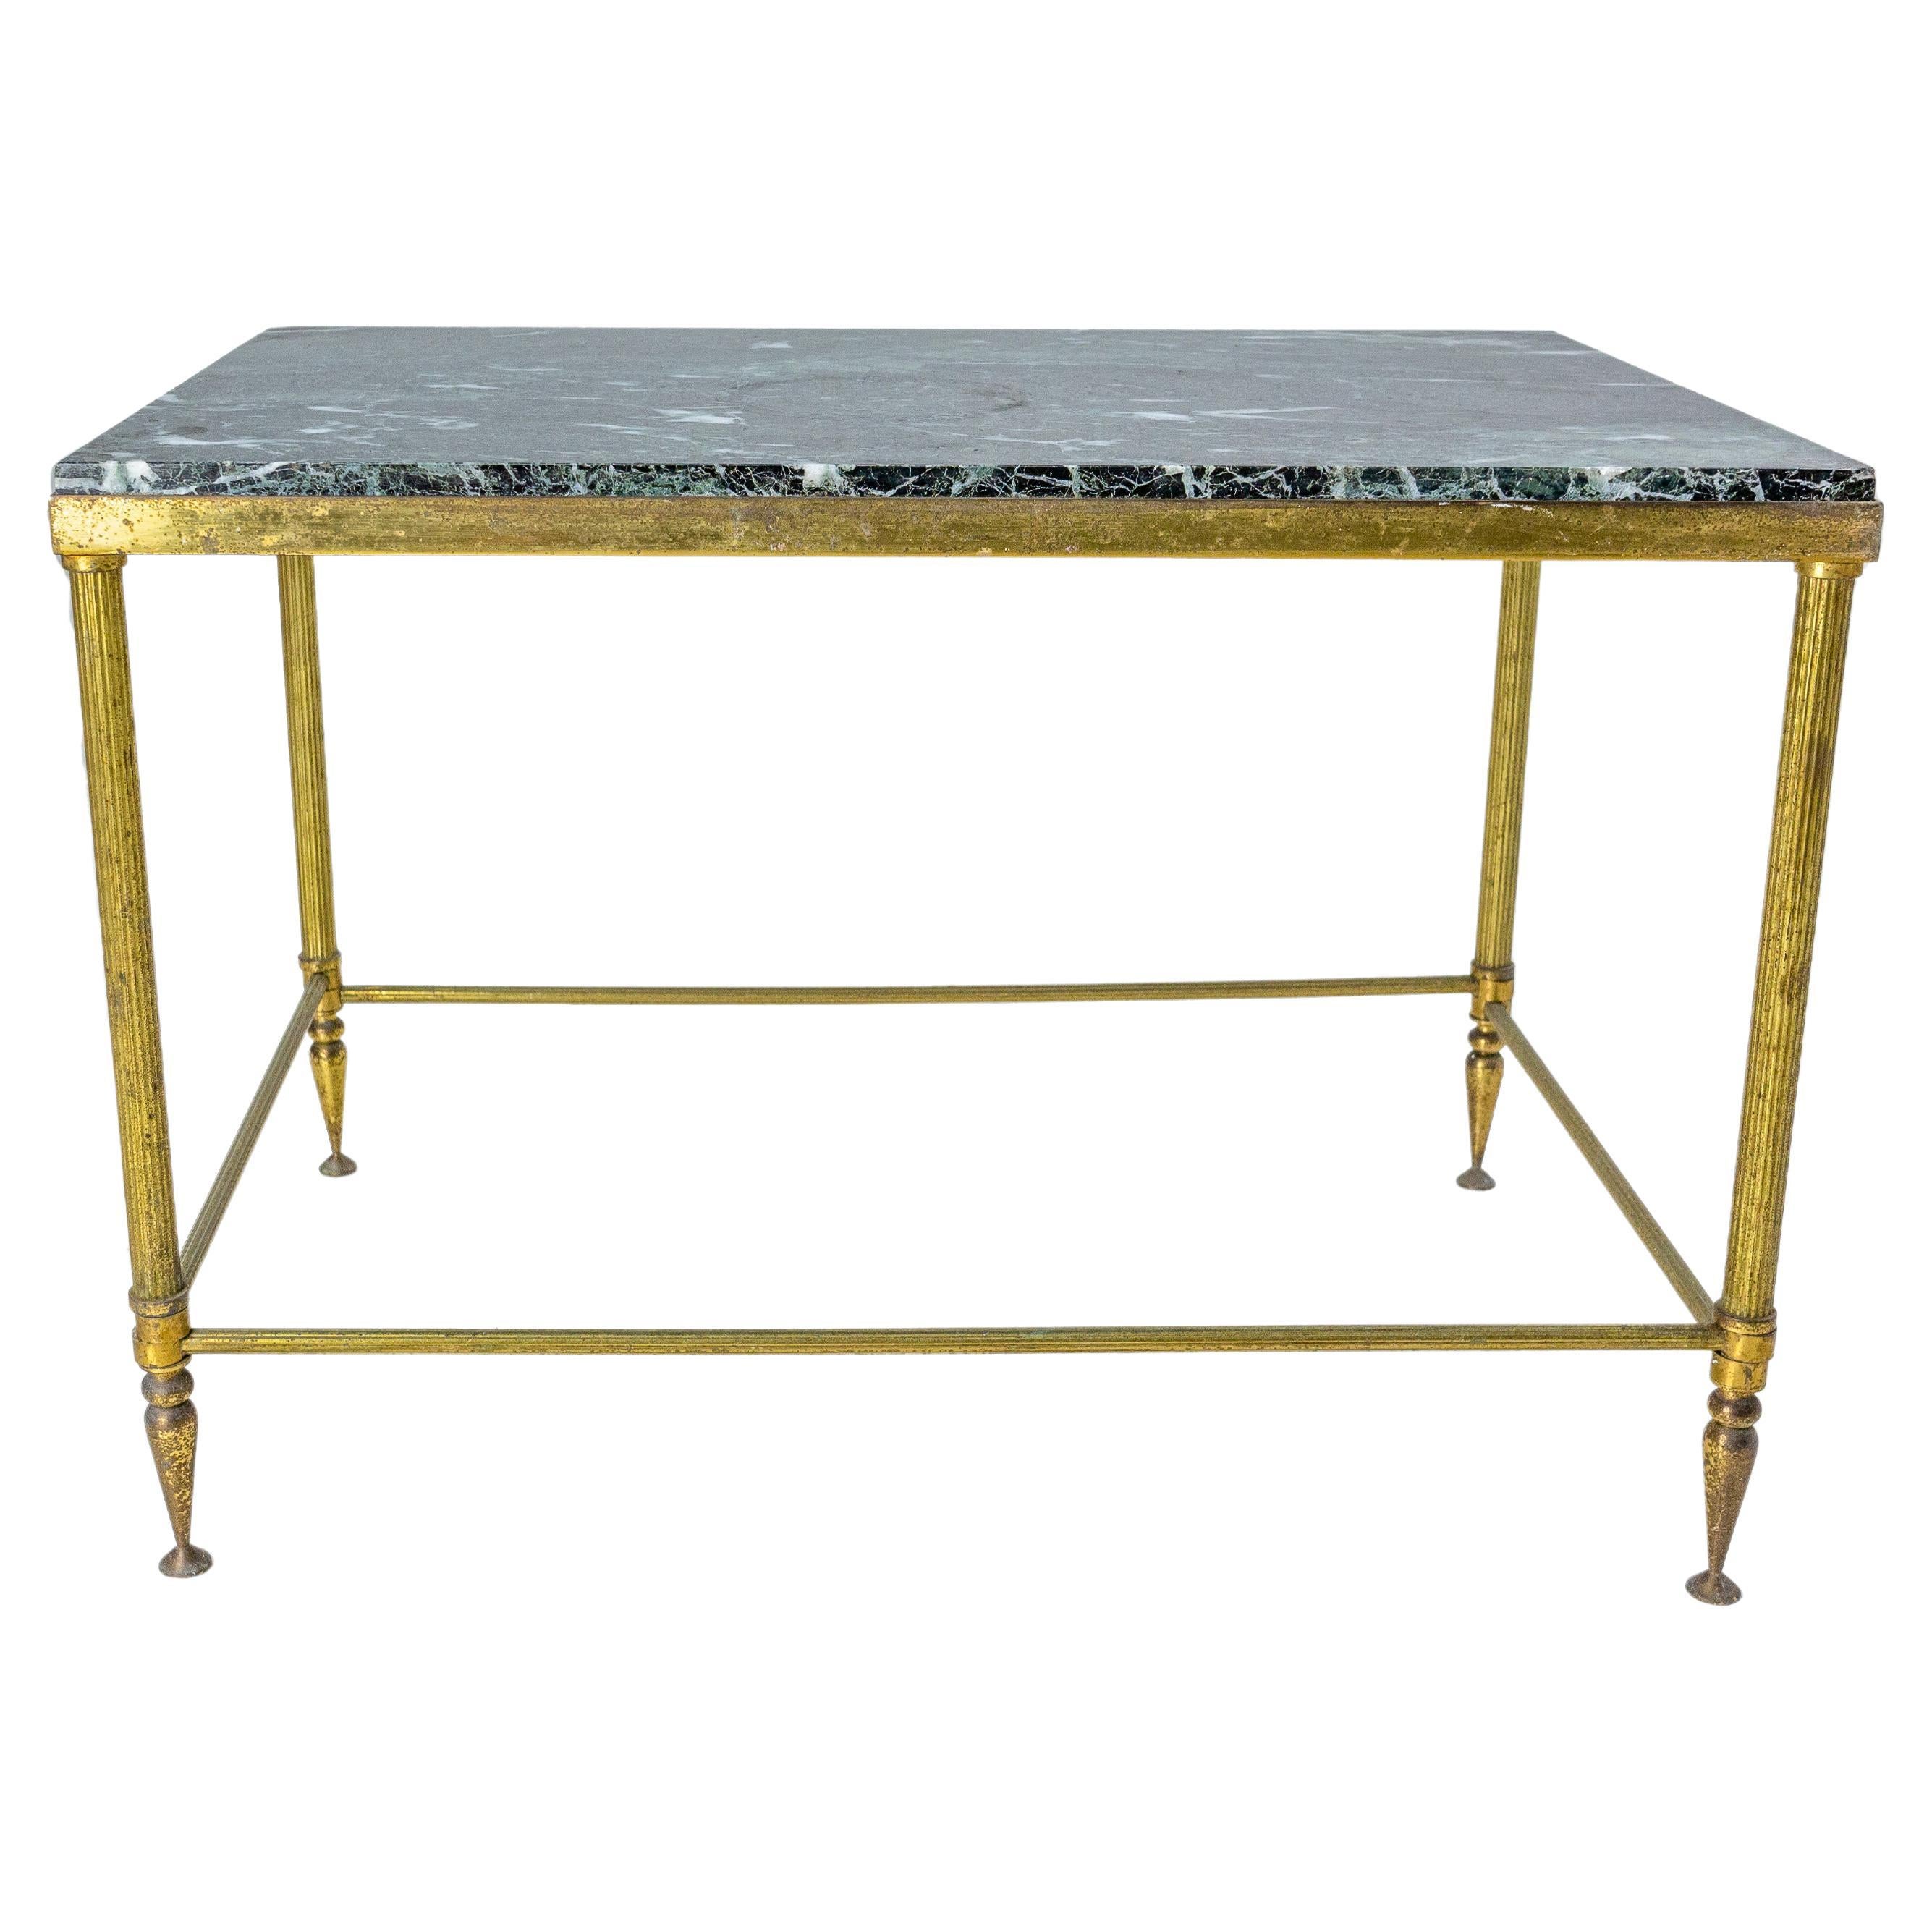 Coffee Table Maison Jansen Style Black Marble and Gilt Brass Midcentury French